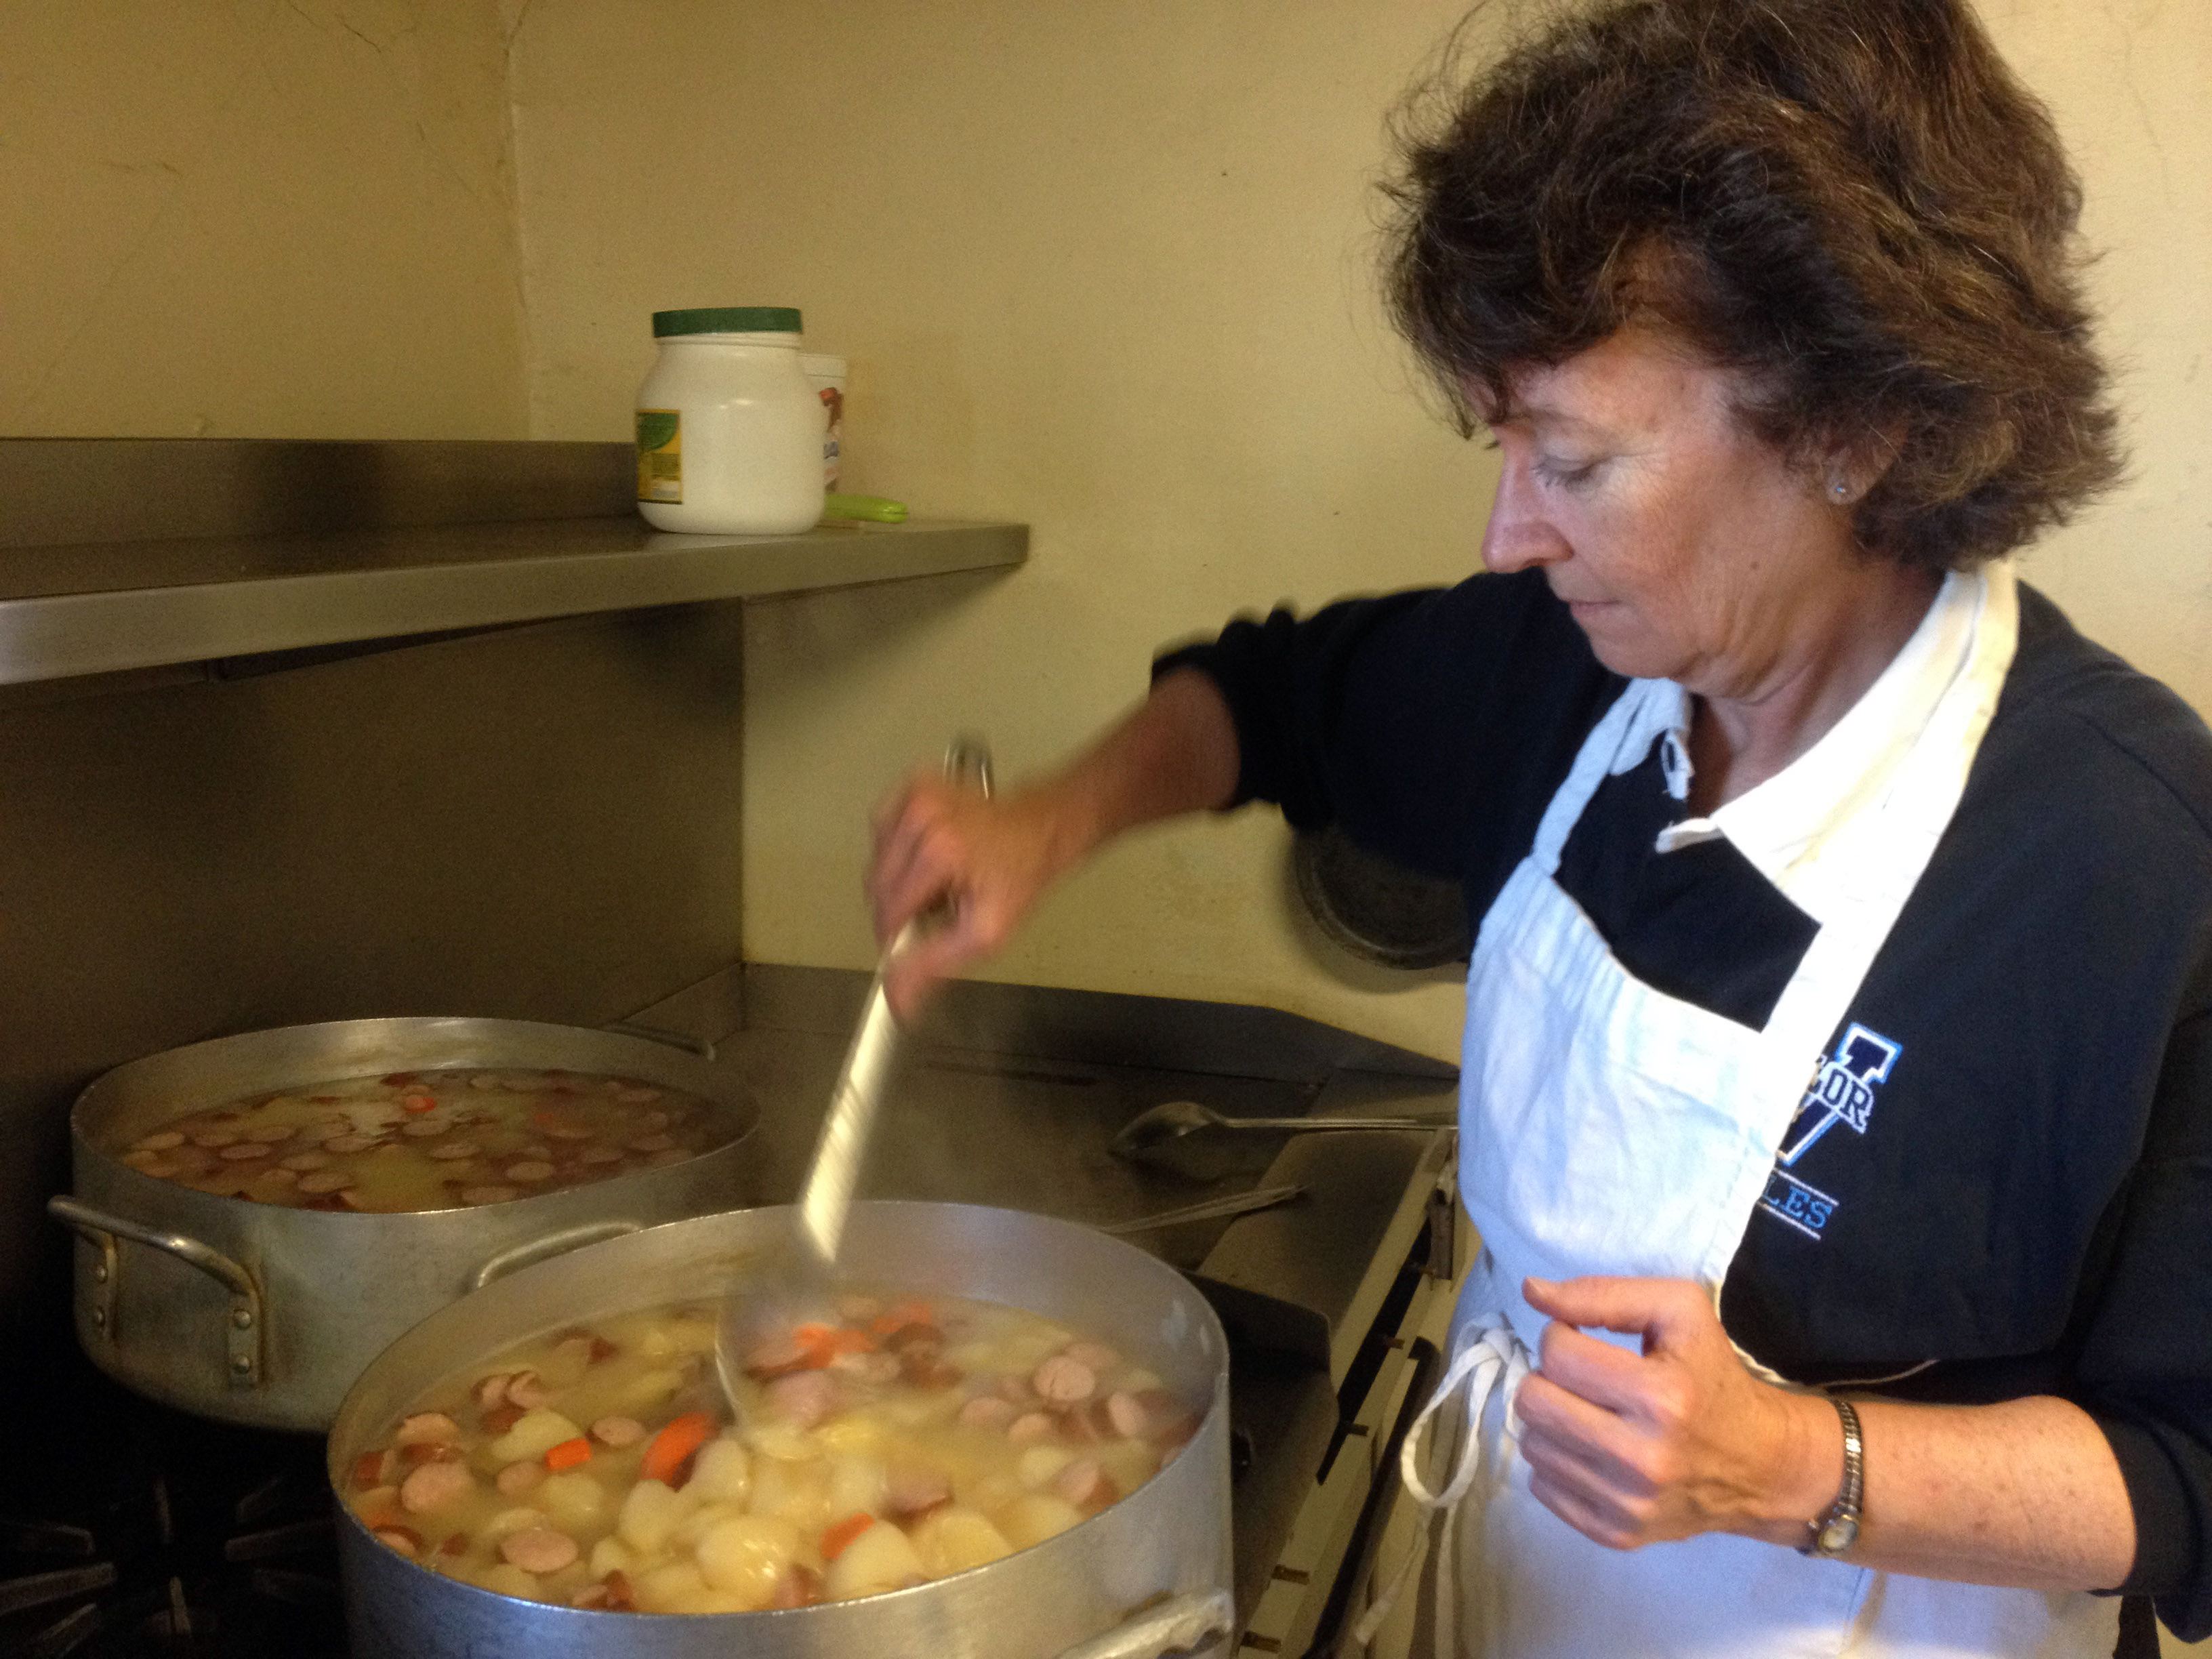 Kim on a missions trip in 2013 cooking dinner for fifty children and staff at Rancho Los Amigos, a childrens' home in Mexico.